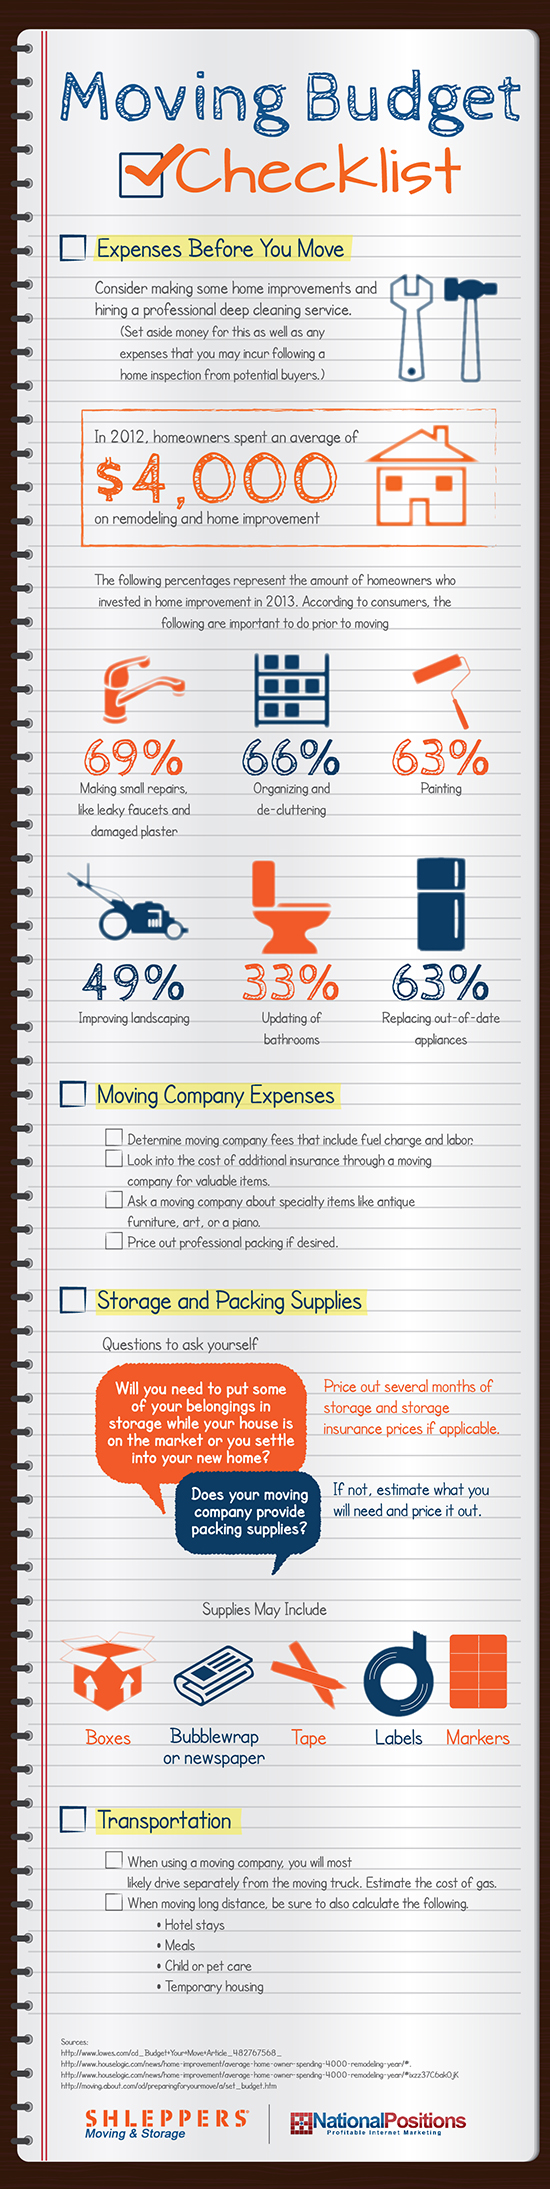 Making a Moving Budget and Checklist - Infographic